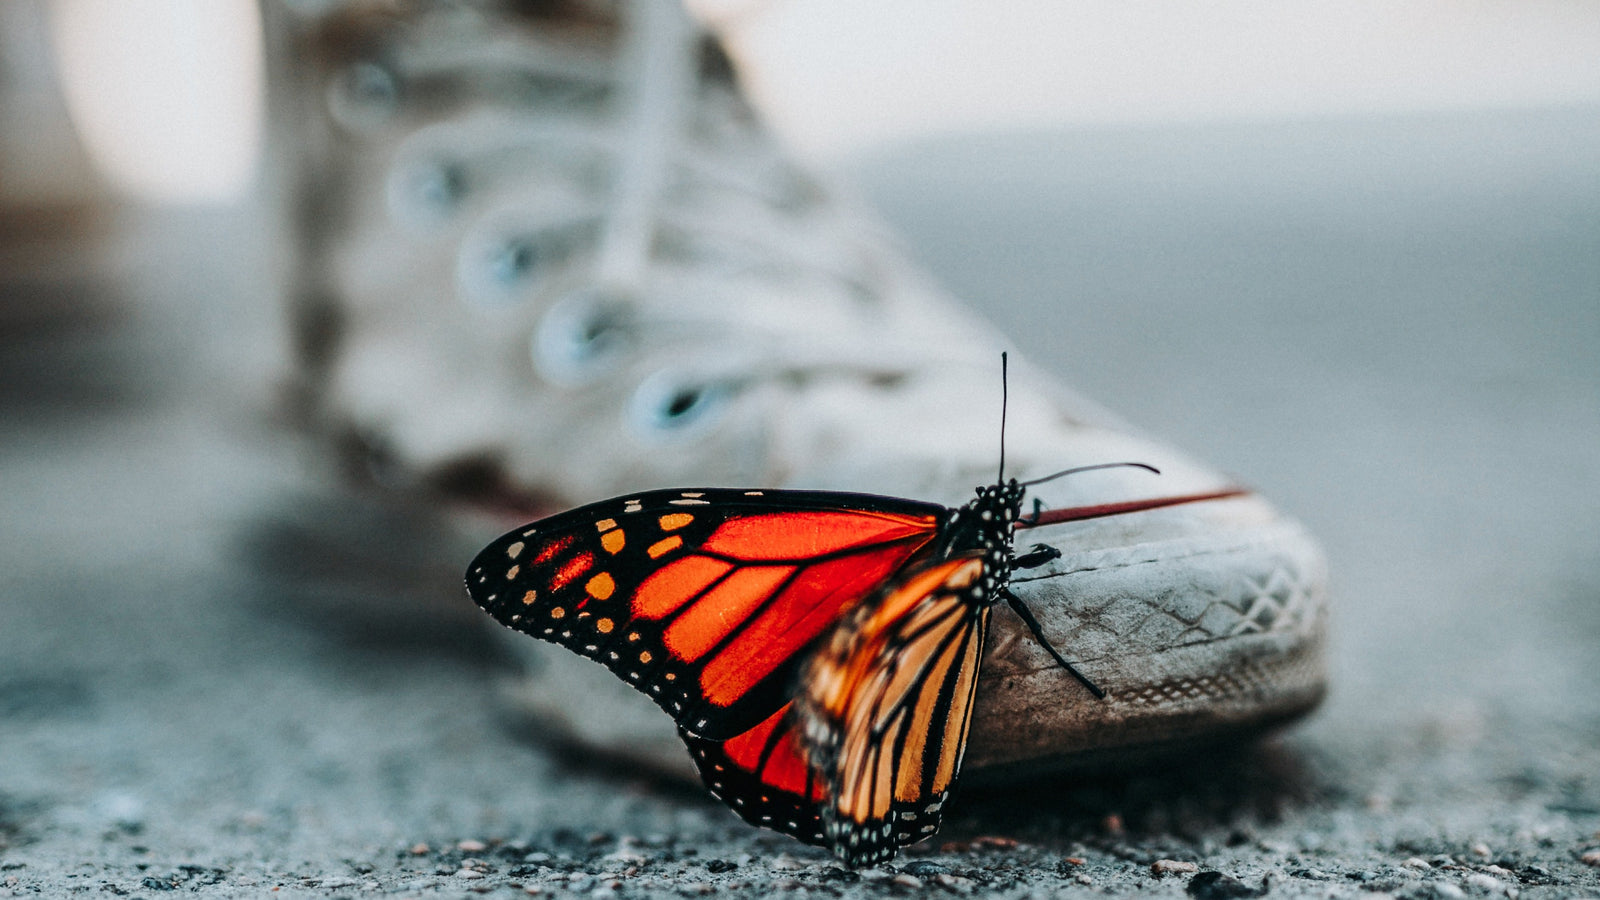 City Living, Monarch Saving: 10 Ways to Help Support Monarch Conservation in an Urban Environment